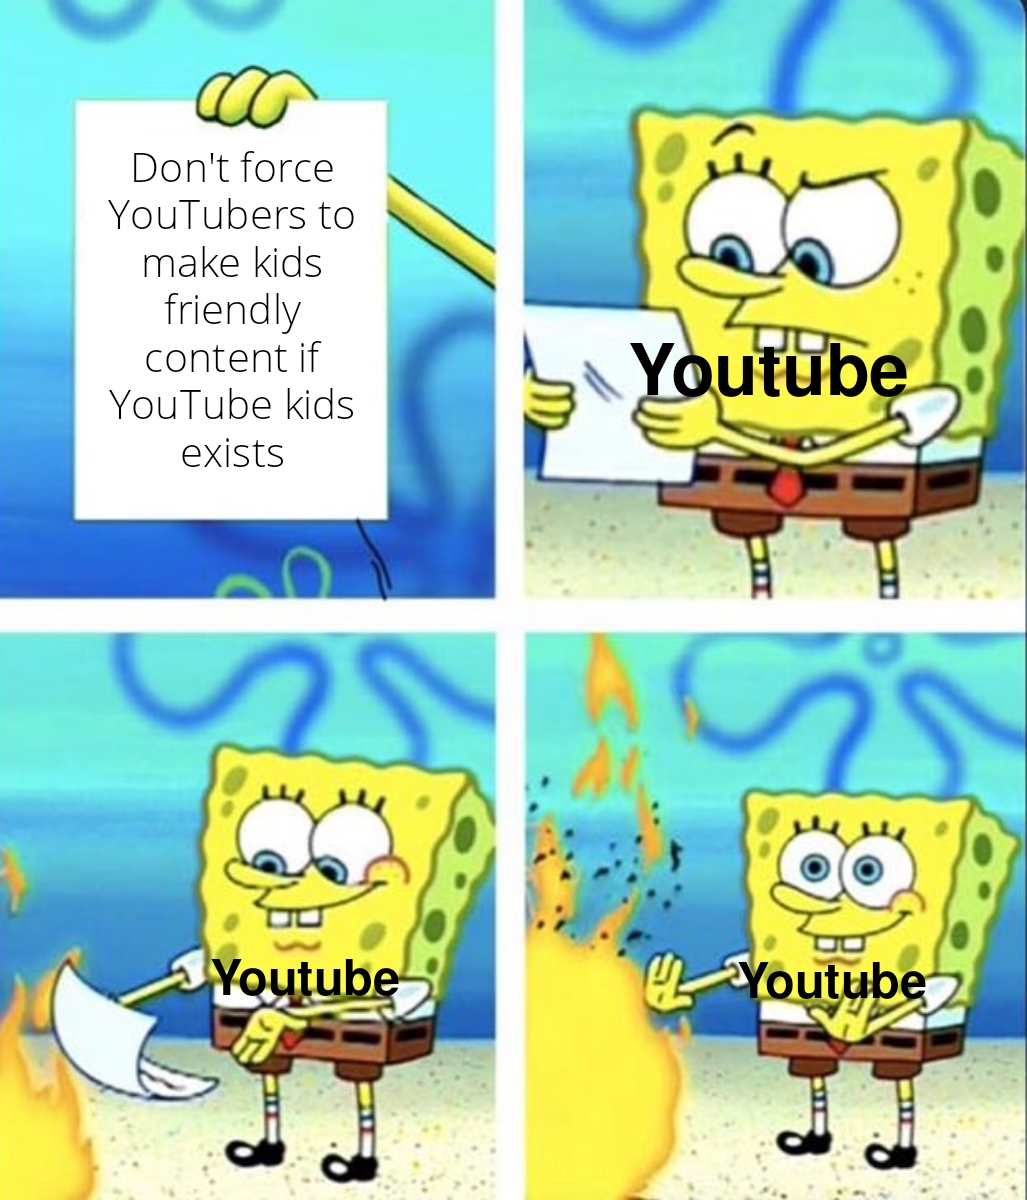 funny memes - man feelings meme - Don't force YouTubers to make kids friendly content if YouTube kids exists Youtube Youtube Hil Youtube